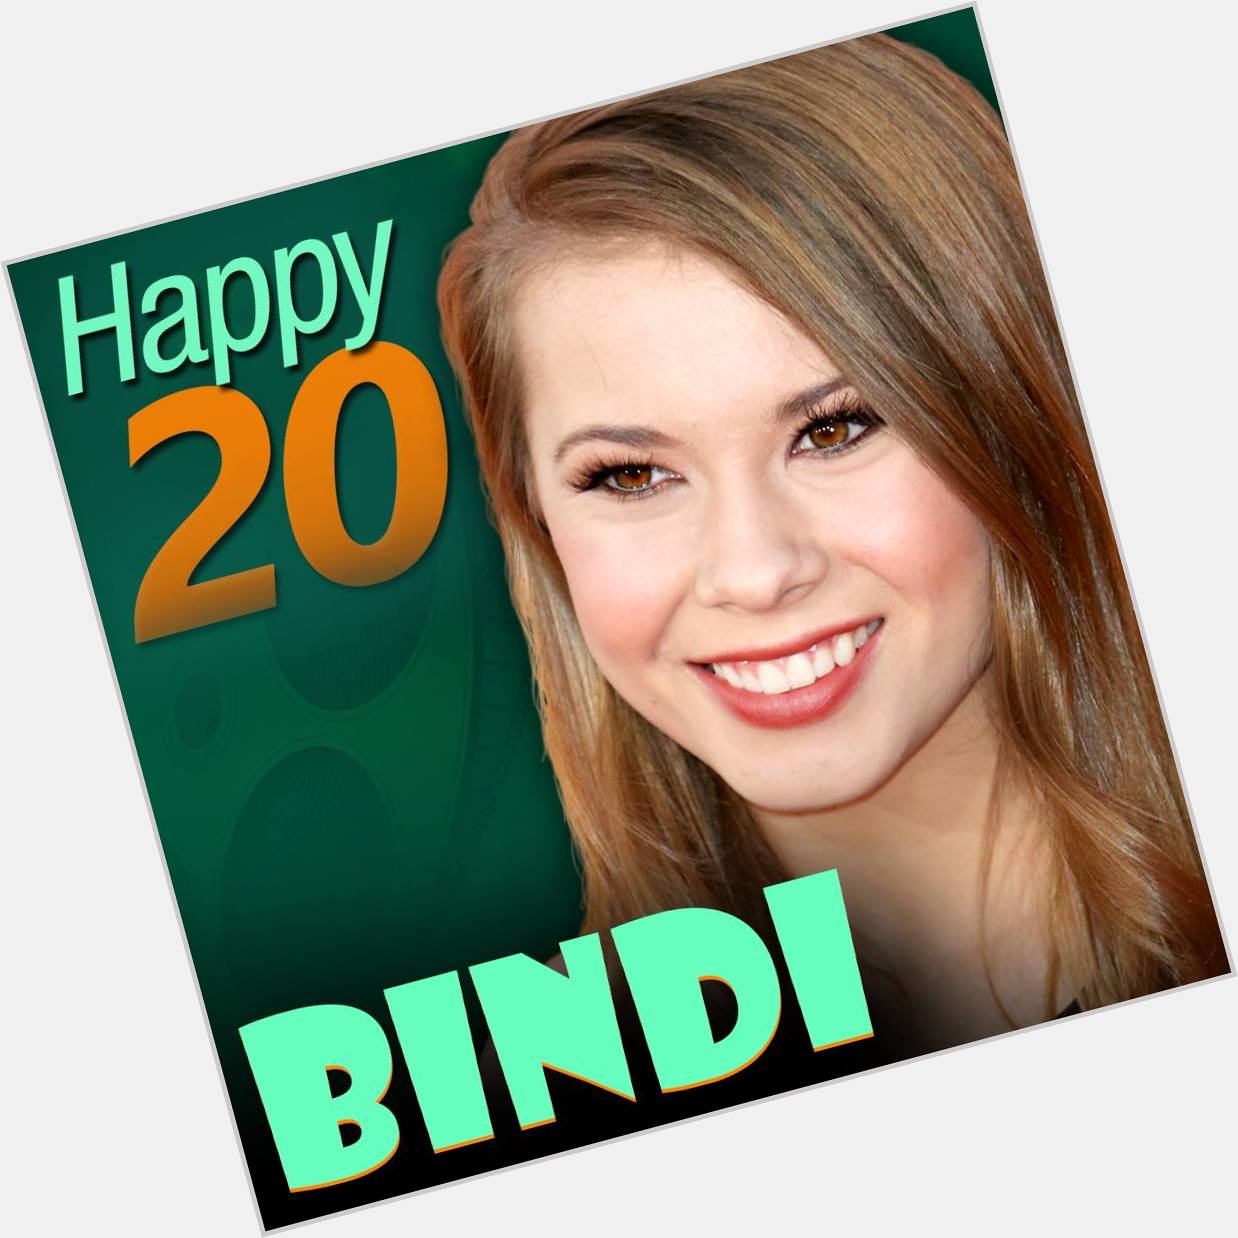 Bindi Irwin grew up before our eyes and now the daughter of the late Steve Irwin is 20 years old. Happy Birthday! 